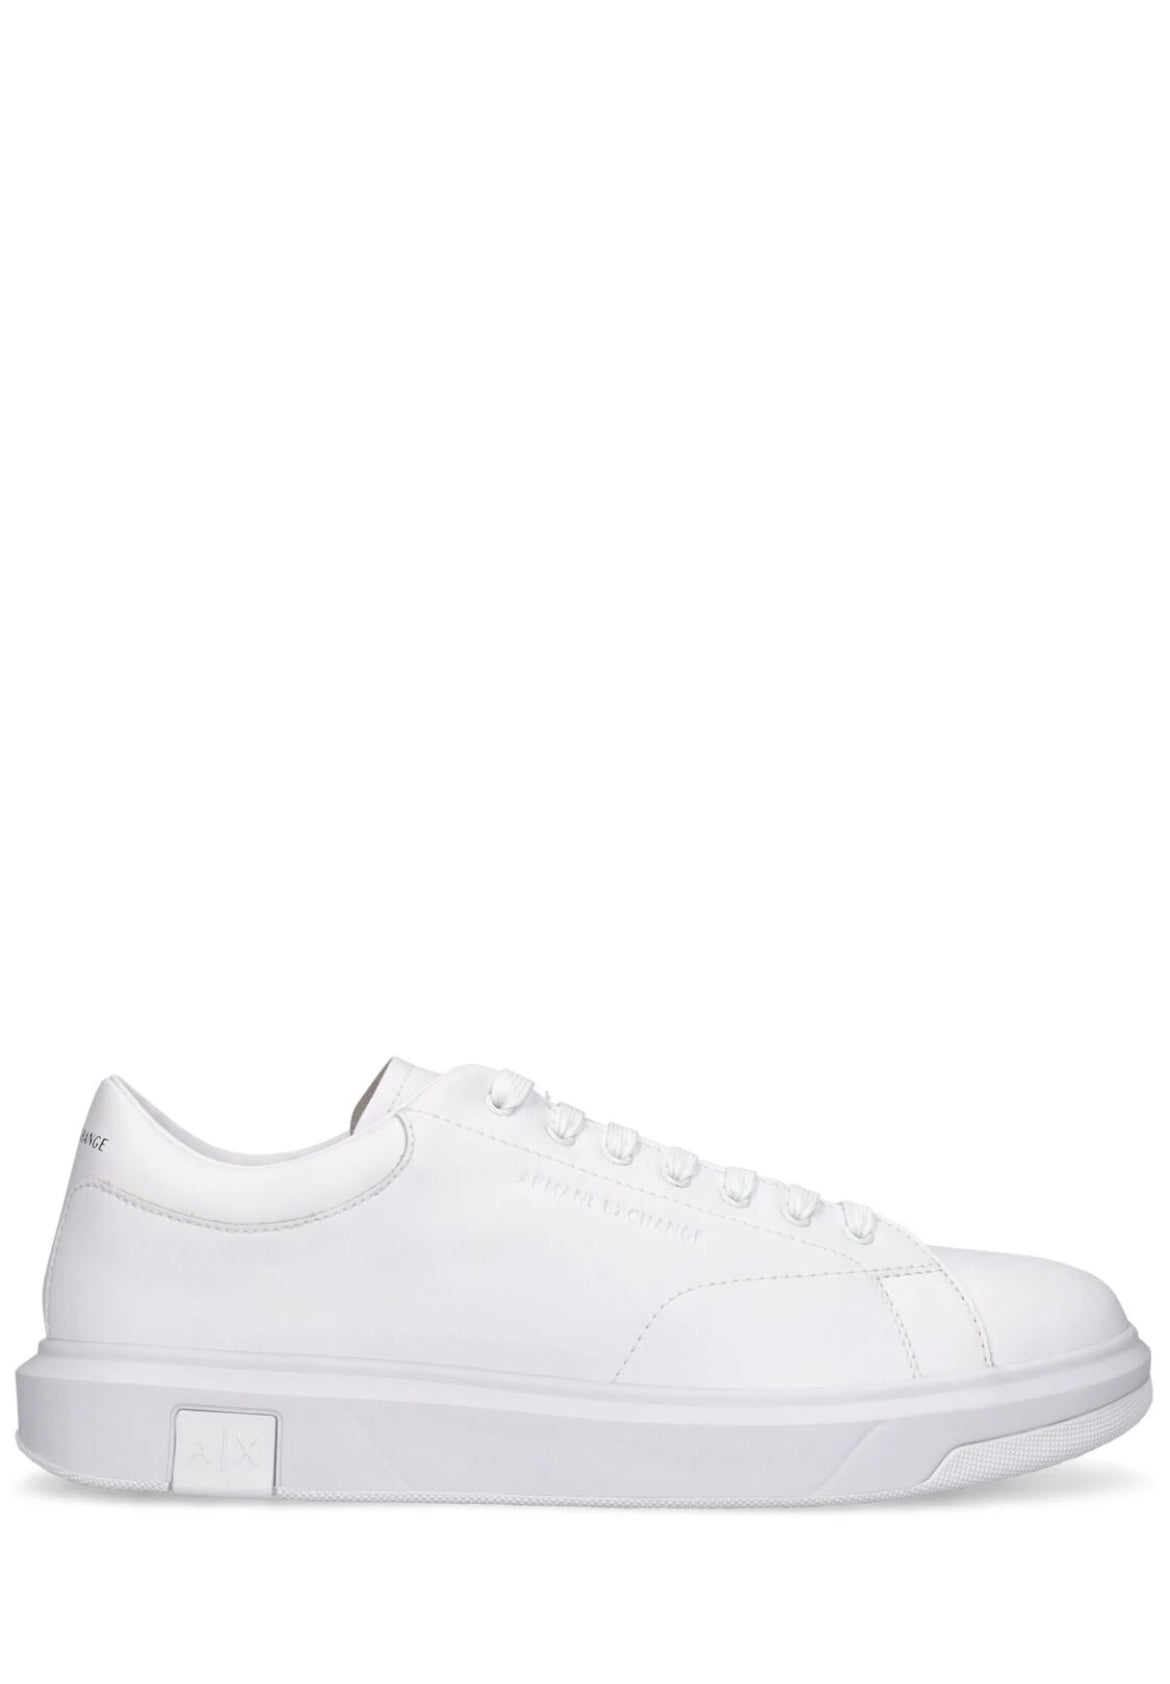 Armani Exchange Leather low top sneakers